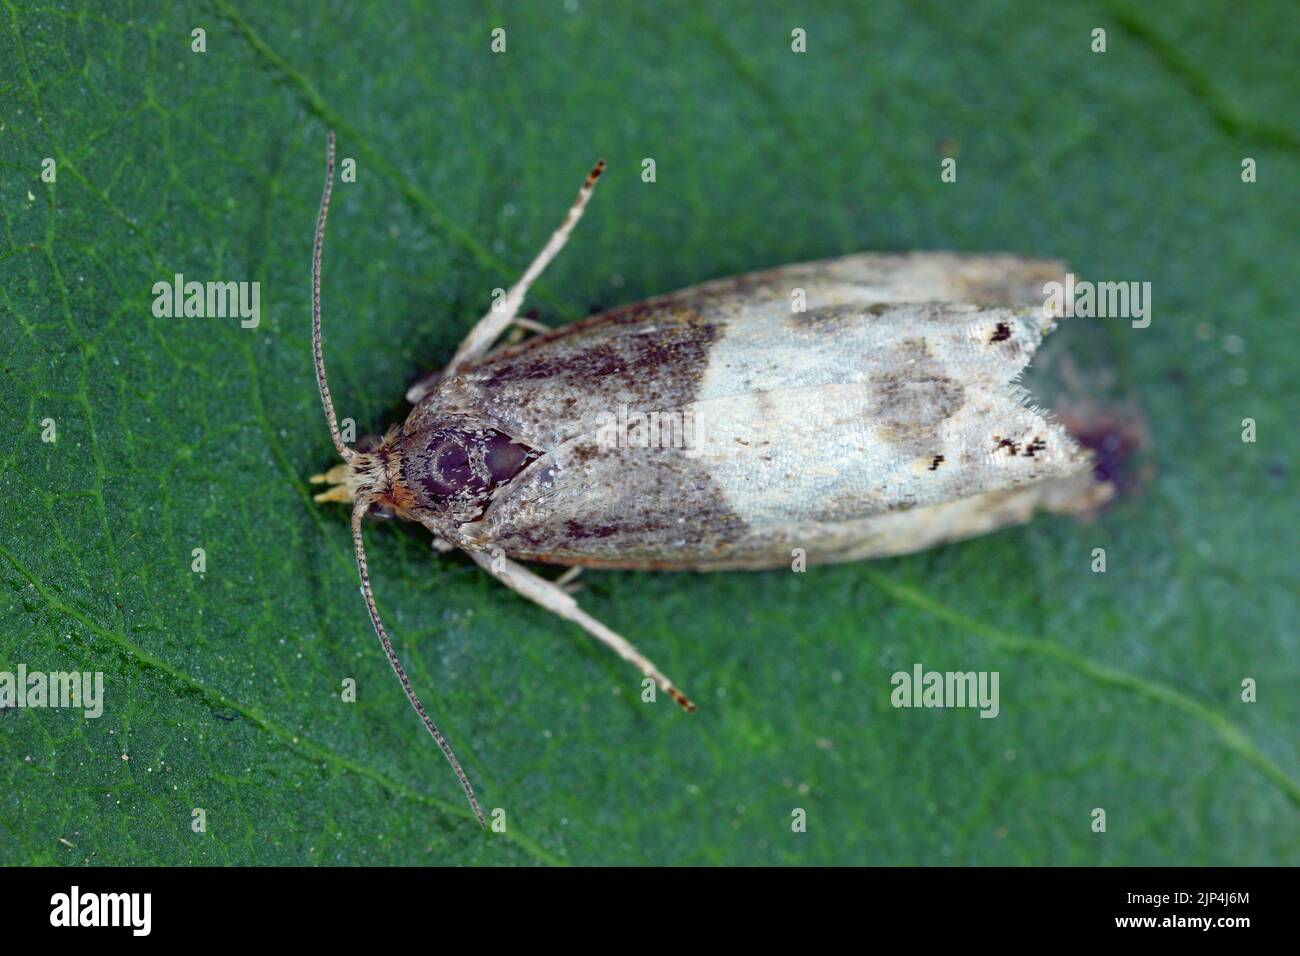 Adult Tortricid Leafroller Moth of the Family Tortricidae. Stock Photo